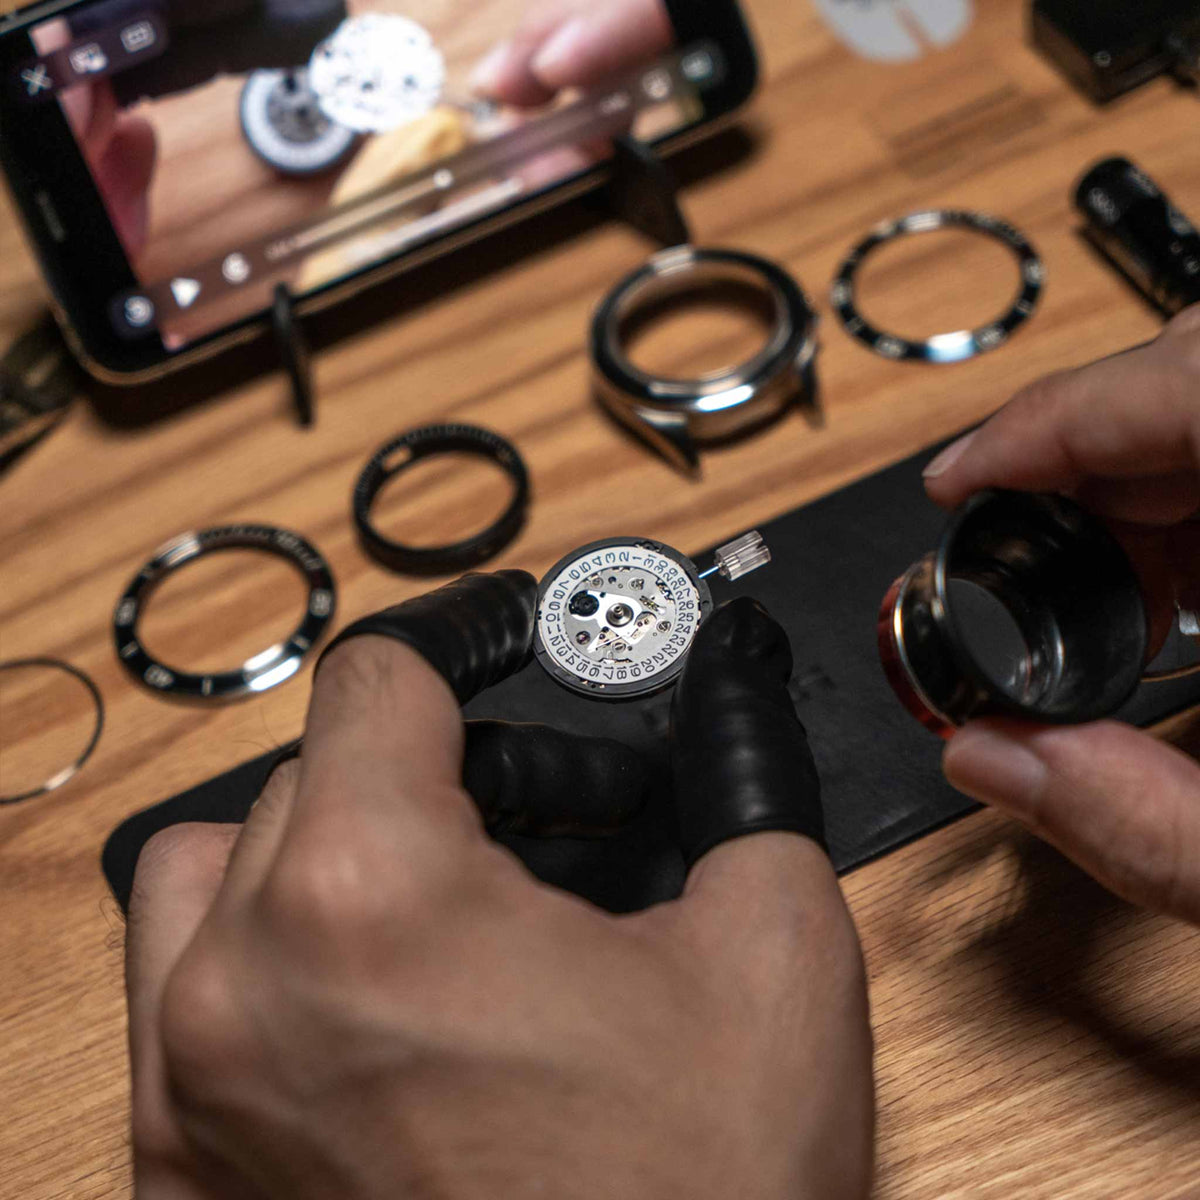 Build your own watch with a Rotate watchmaking kit - The Gadgeteer